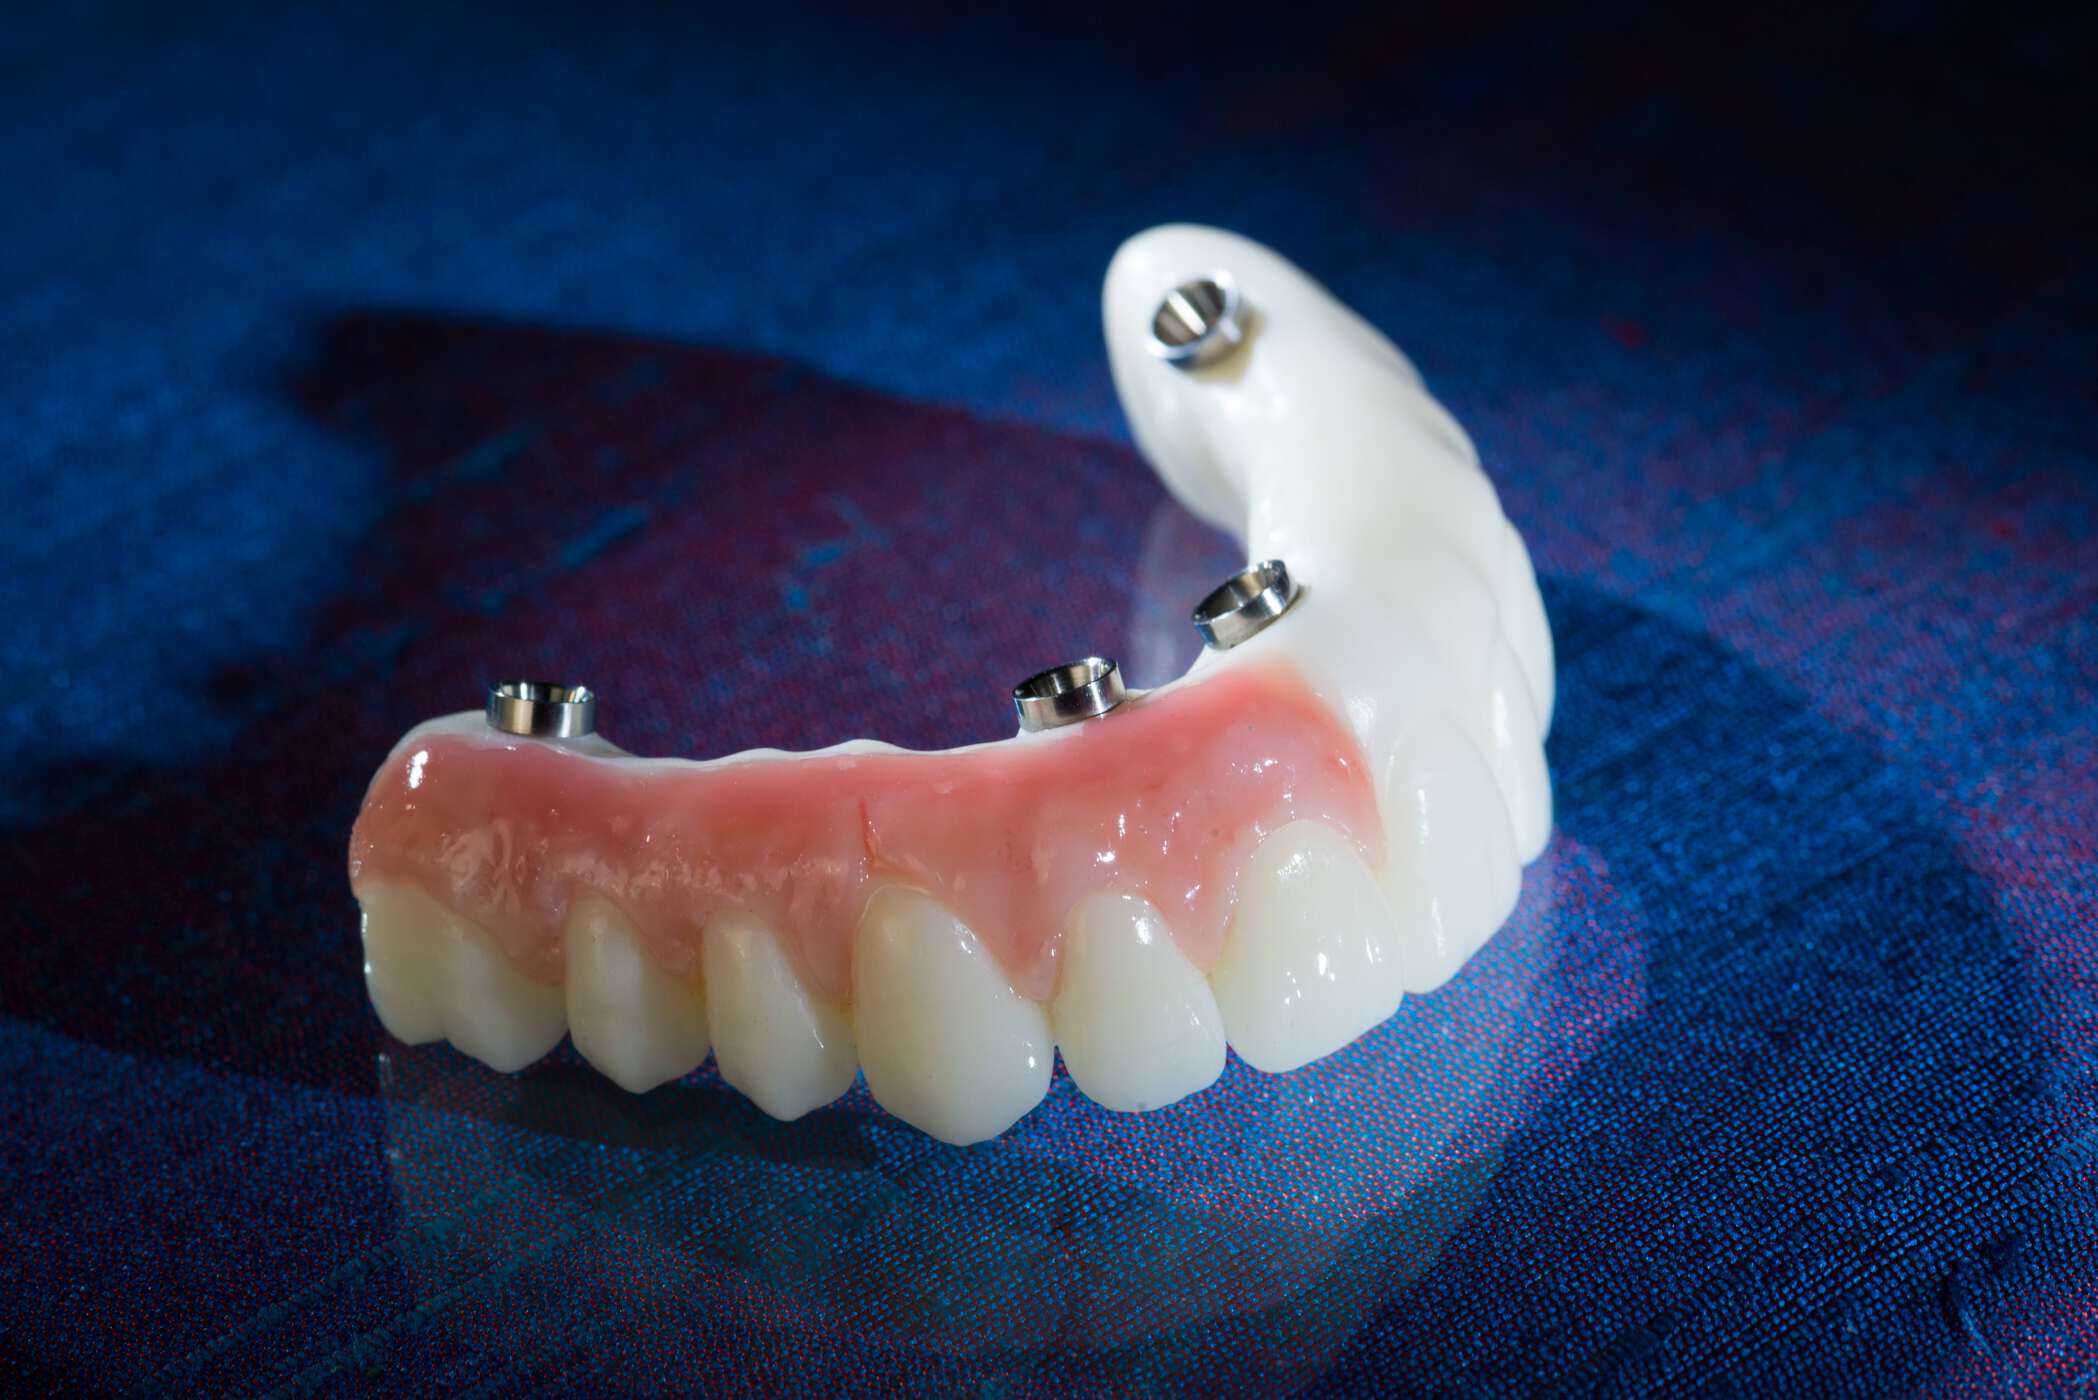 DuraTemps PMMA provisionals produced by Burbank Dental Lab